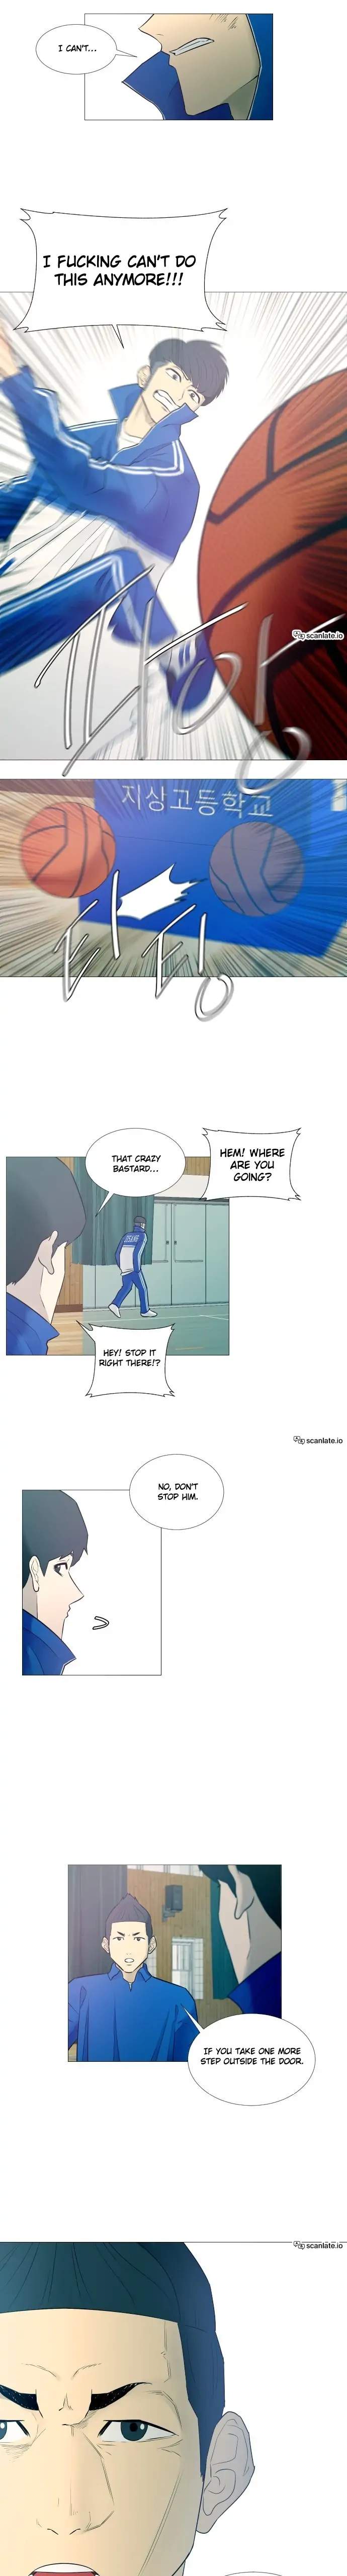 Garbage Time – Basketball Underdogs Chapter 14-eng-li - Page 8